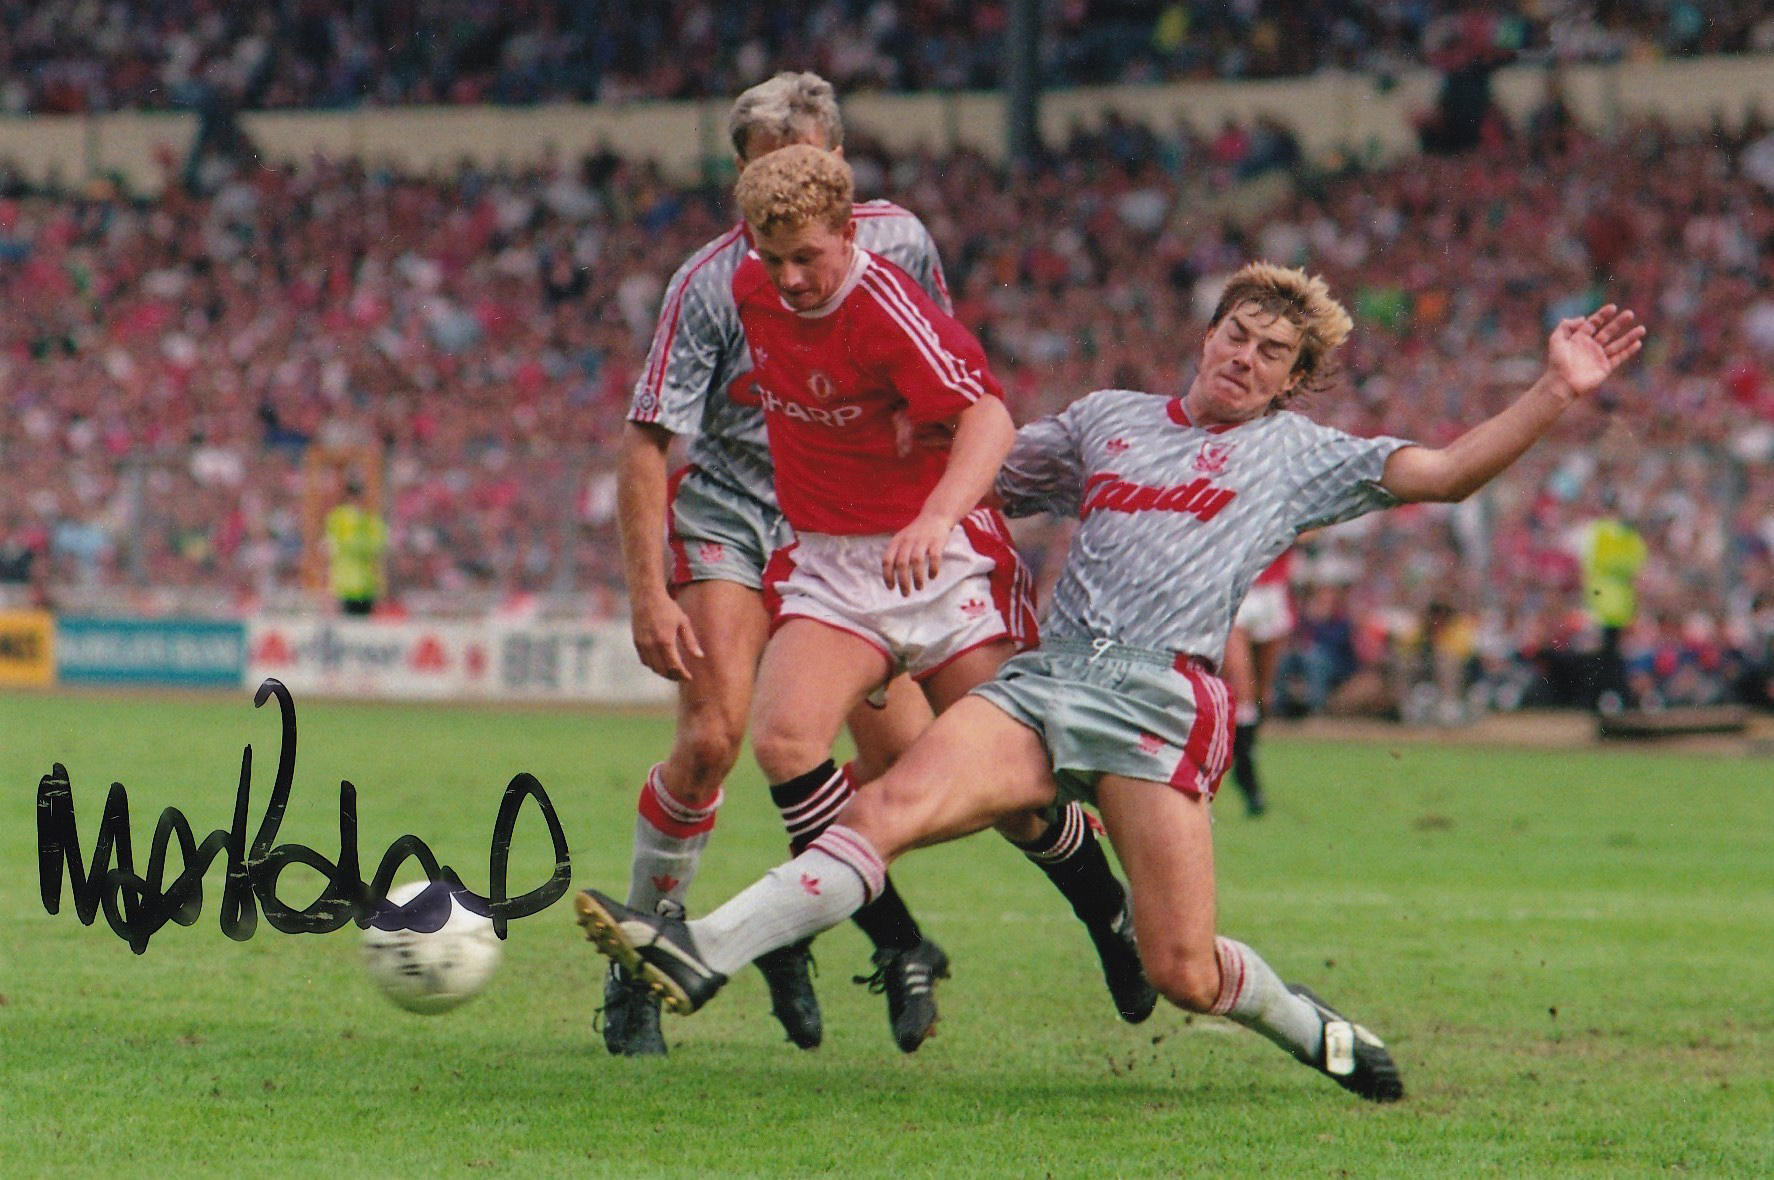 Autographed MARK ROBINS 6 x 4 Photo : Col, depicting Manchester United striker MARK ROBINS evading a